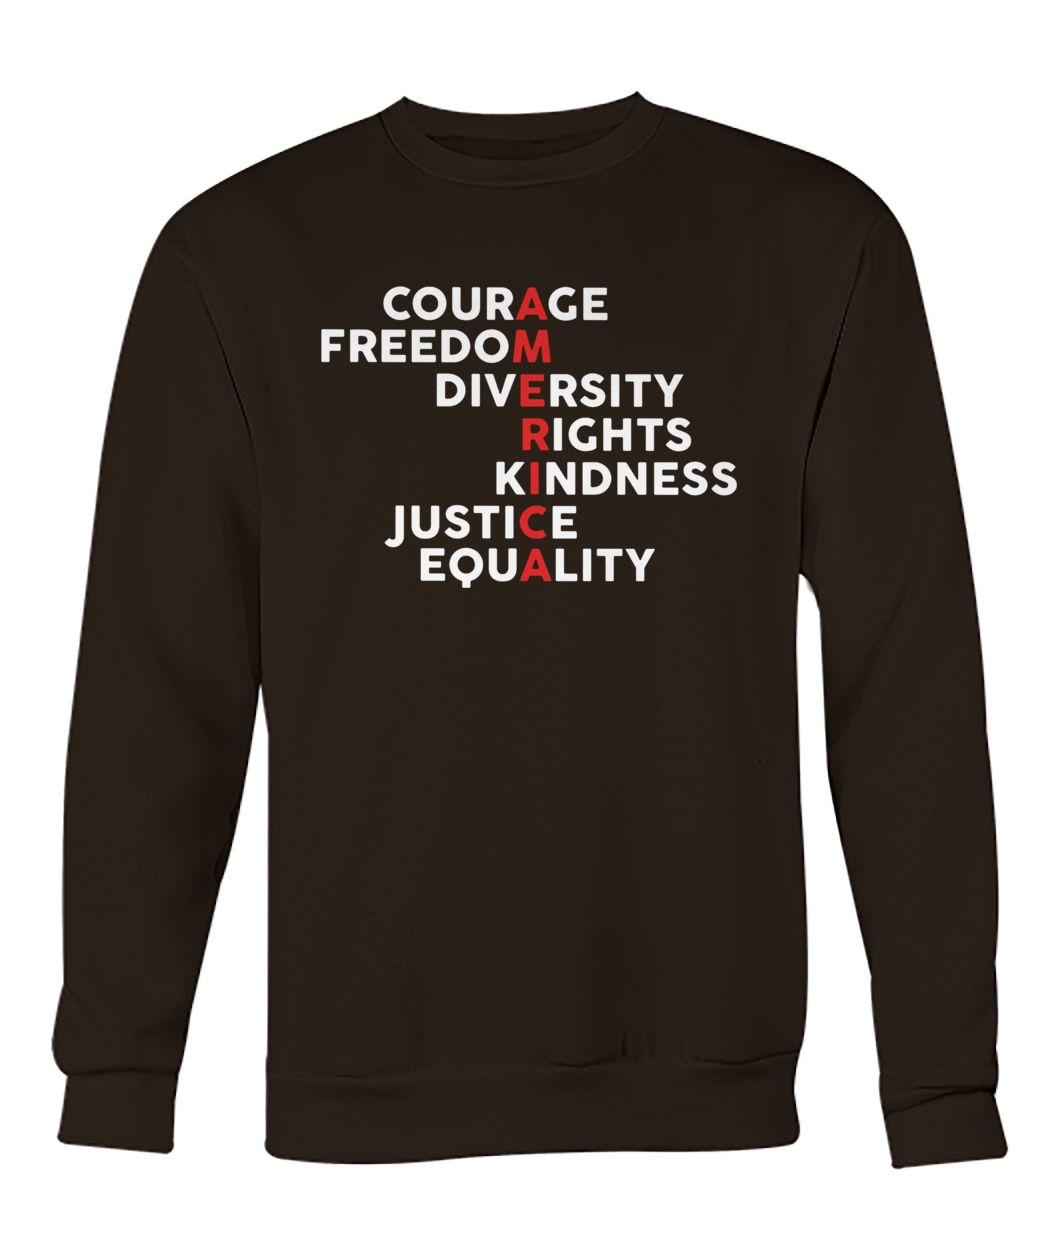 Courage freedom diversity diversity rights kindness justice equality crew neck sweatshirt